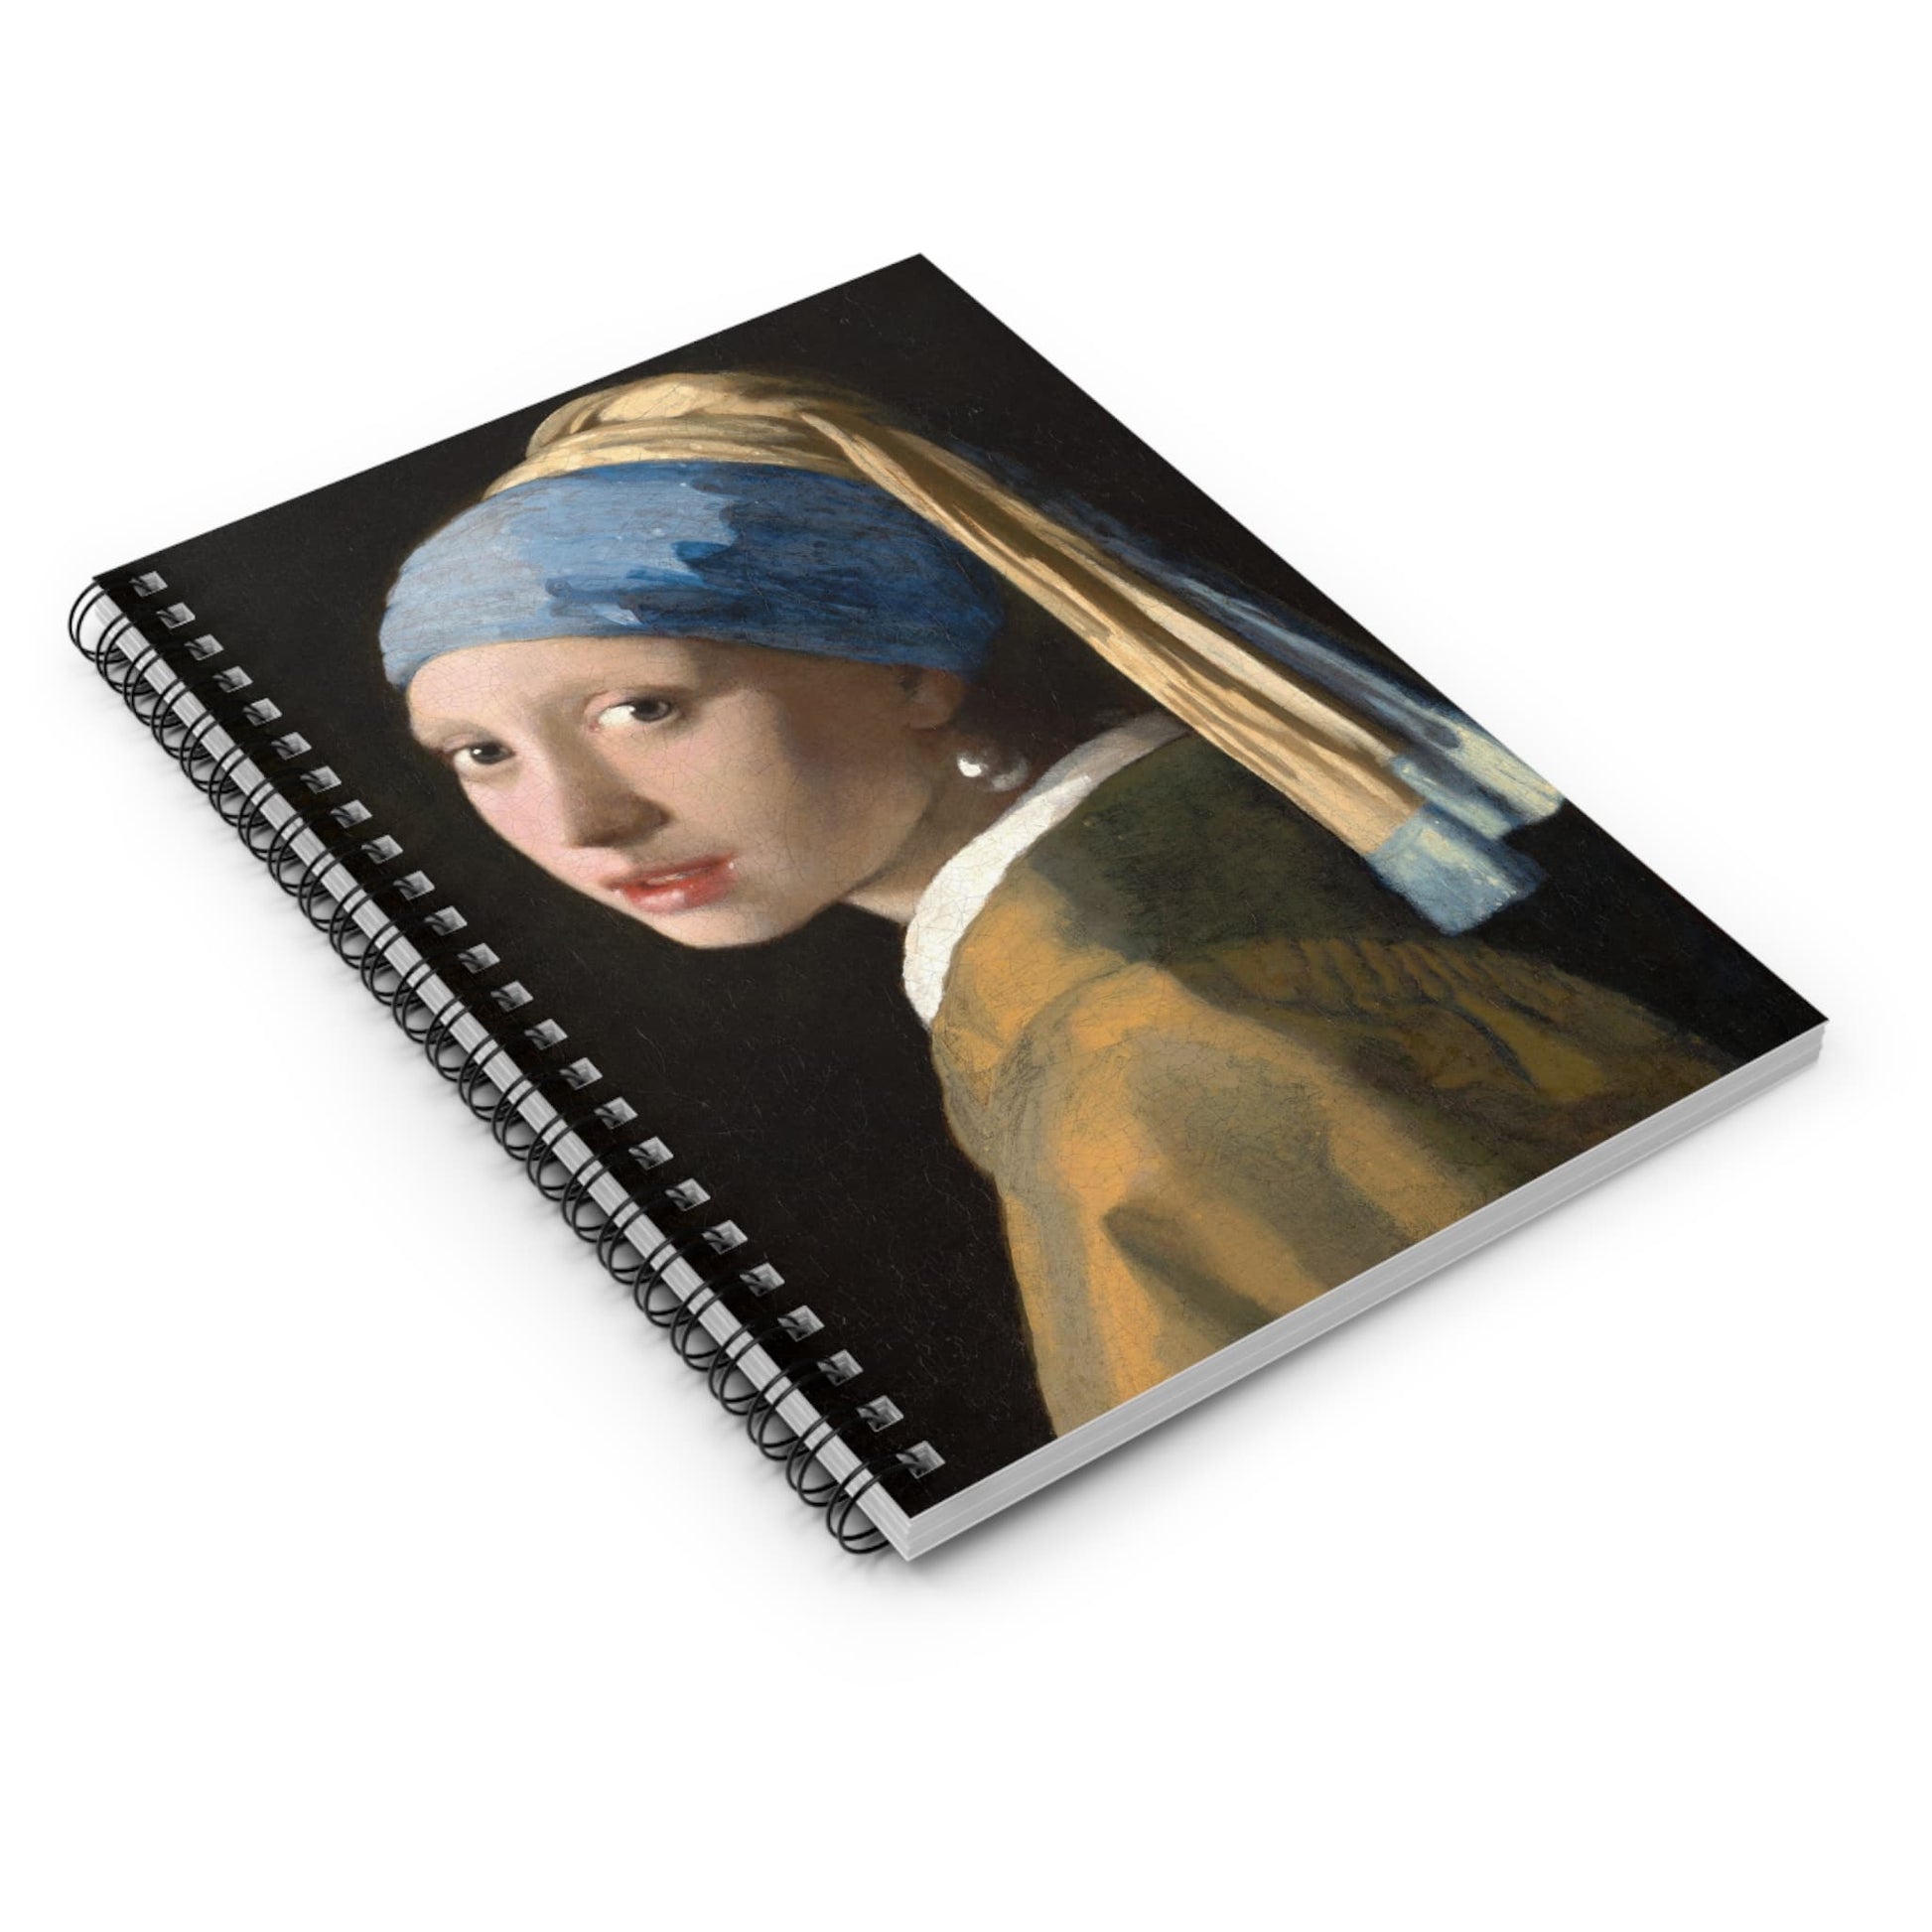 Famous Spiral Notebook Laying Flat on White Surface